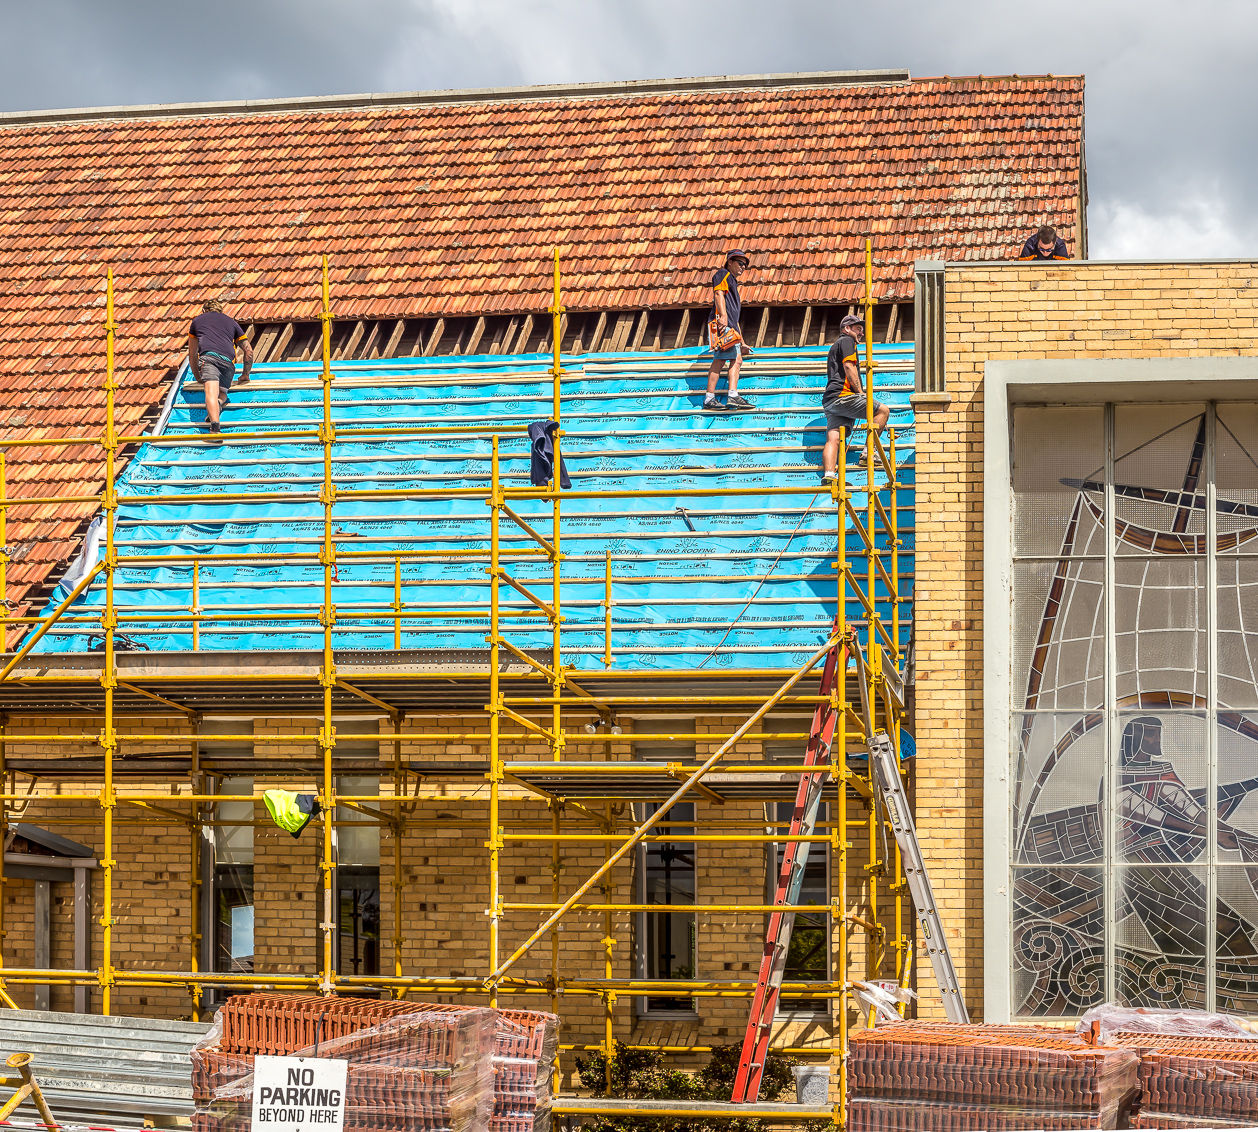 29th January 2015, Roof replacement at High Street Uniting Church